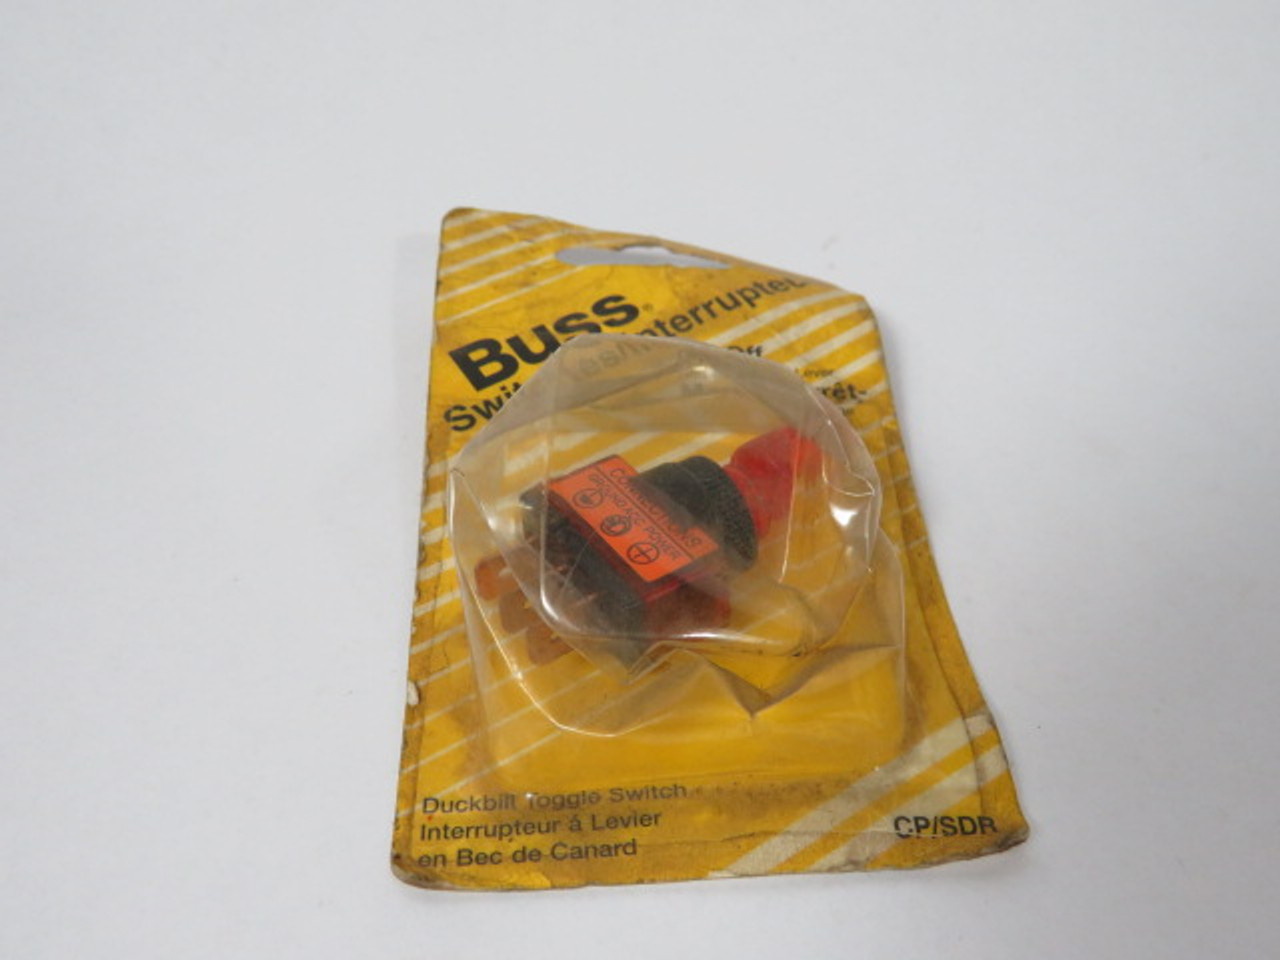 Bussmann CP/SDR Red Illuminated Duckbill Toggle Switch 20A 12V ! NEW !